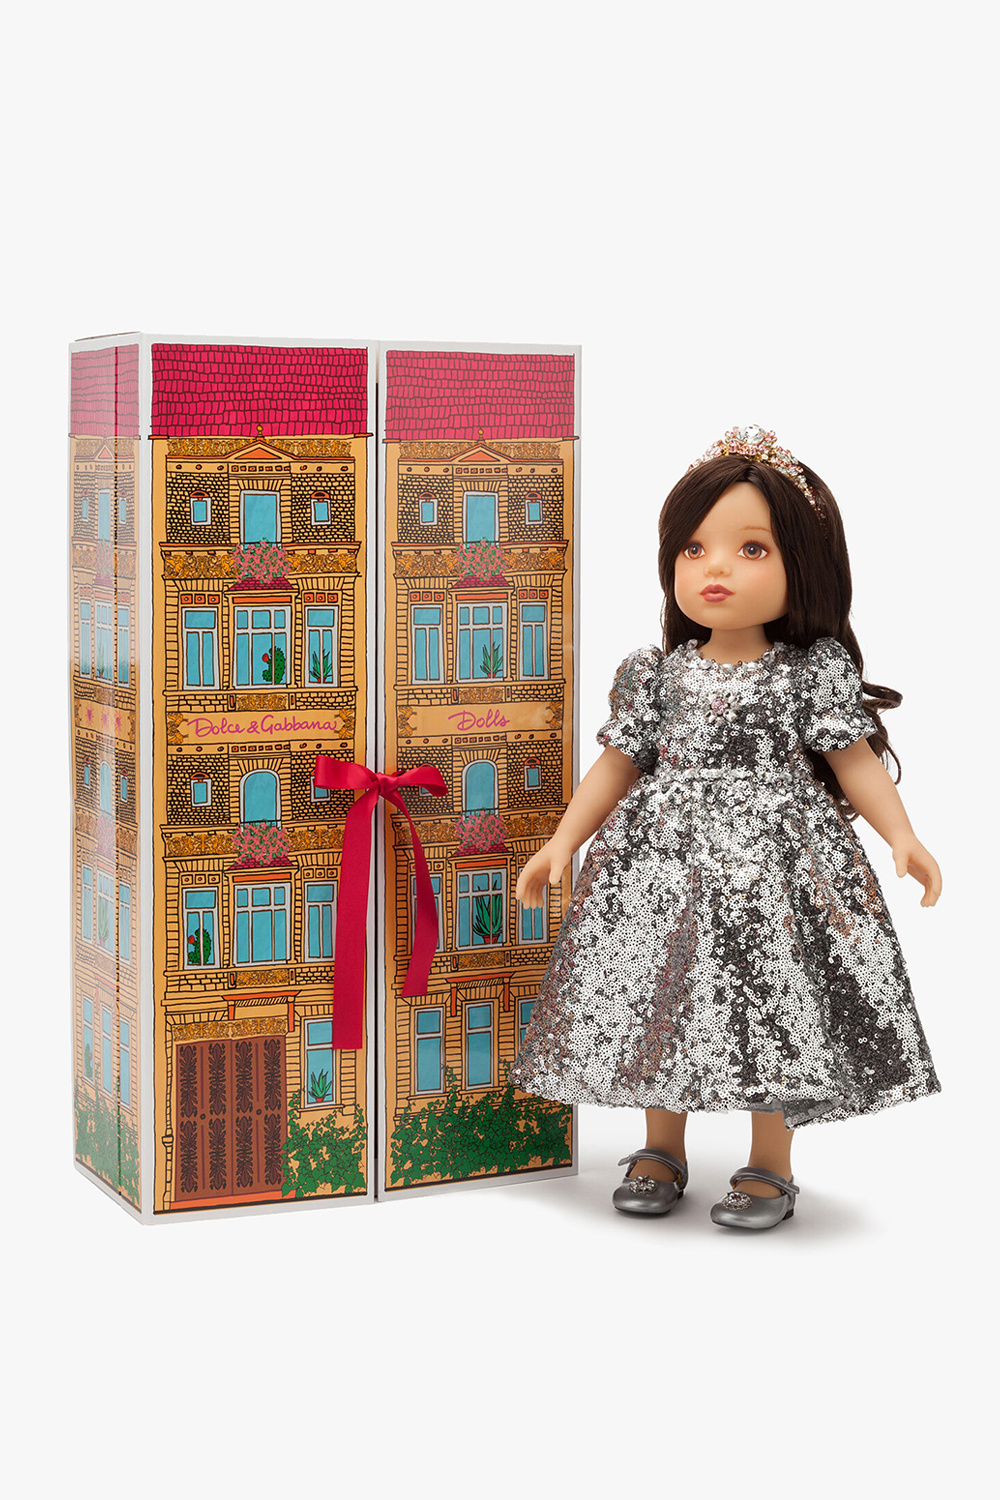 dolce necklace & Gabbana Kids Doll from the ‘Dolls Special Project’ collection